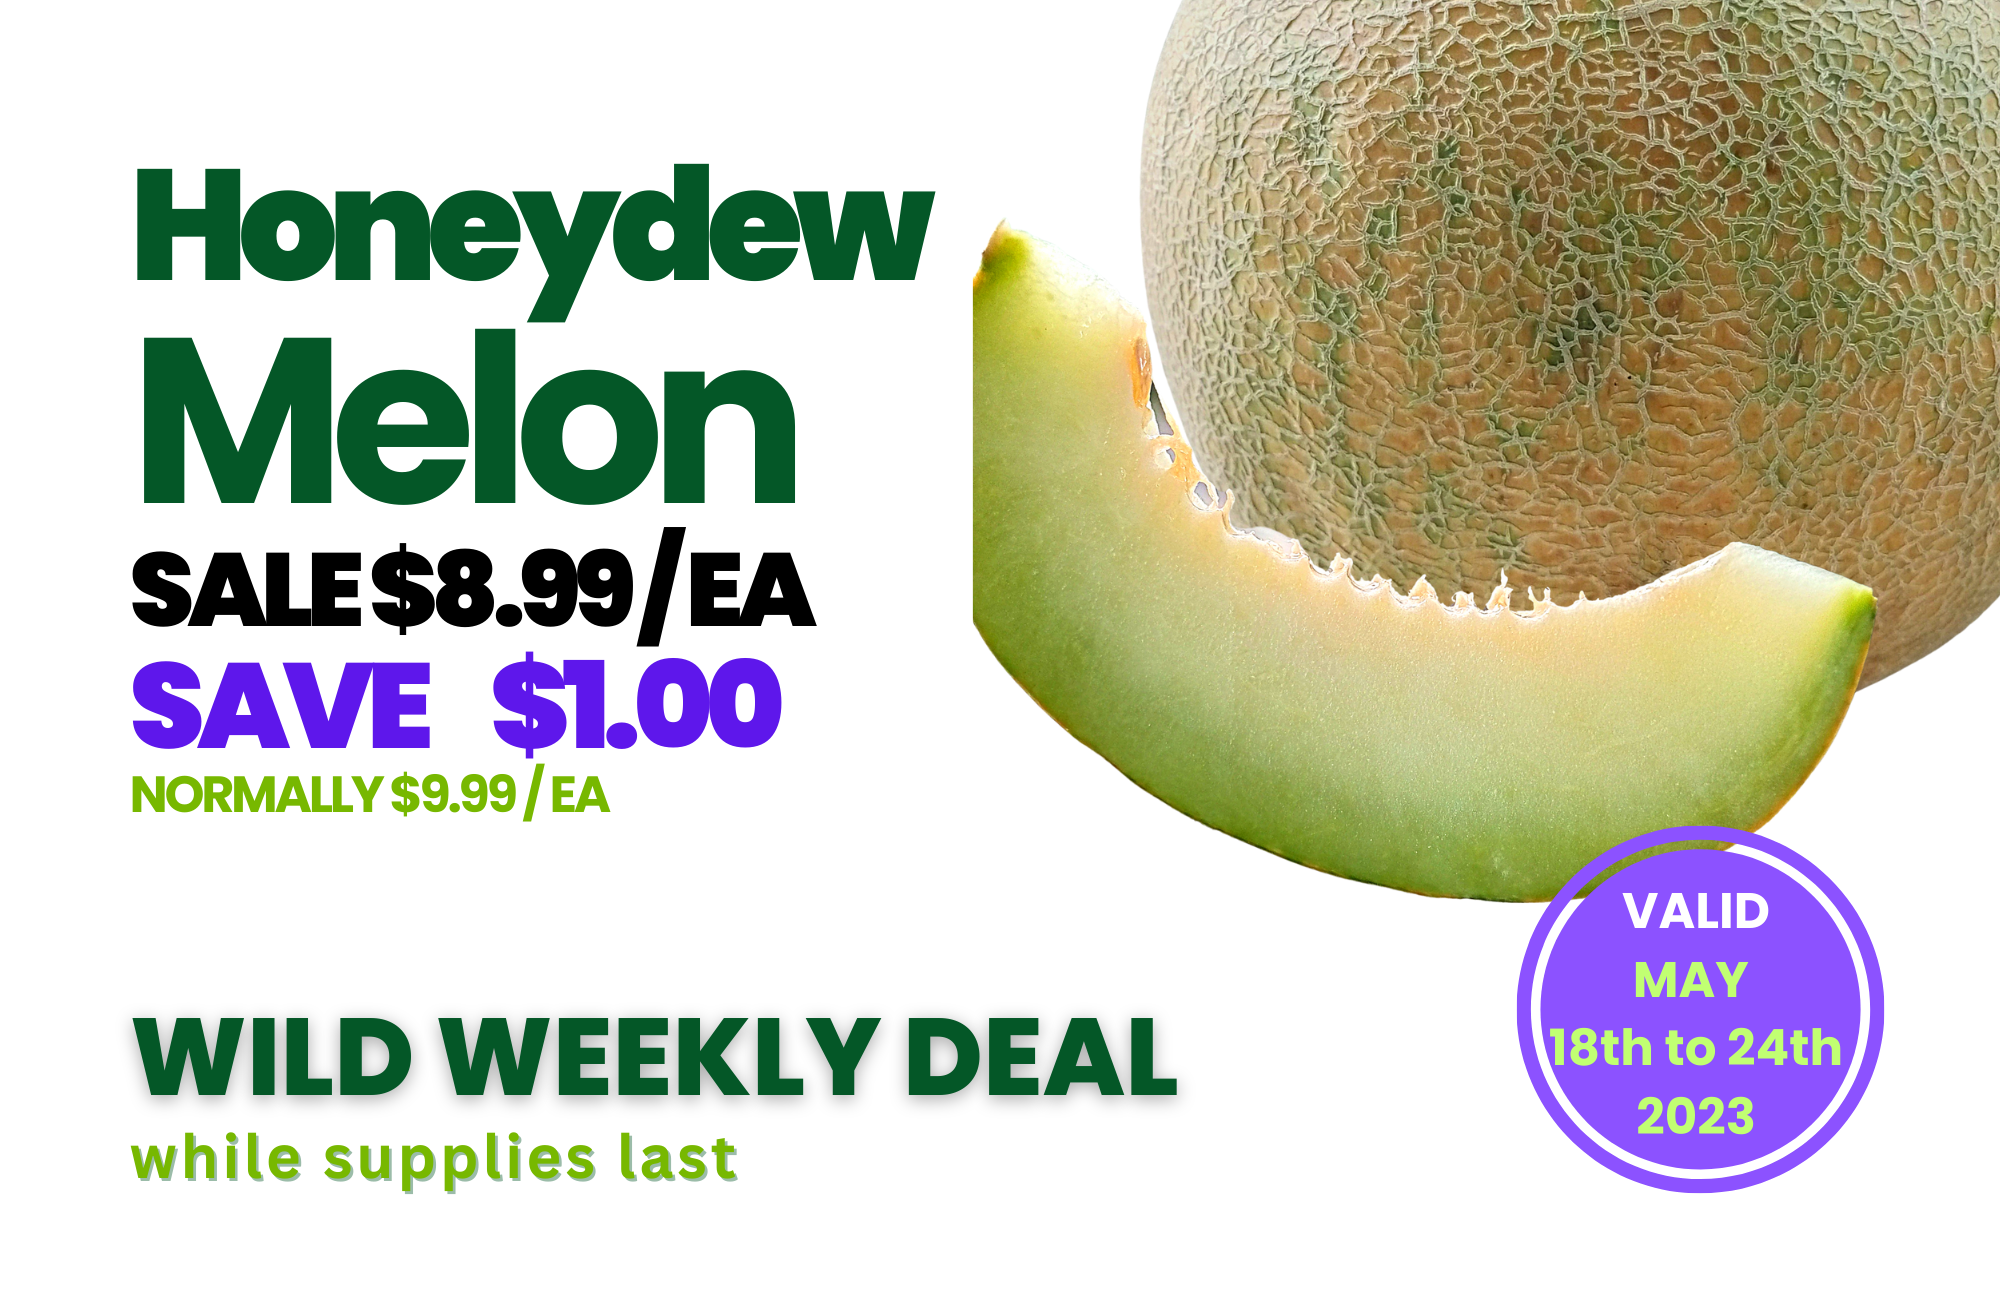 Wild Oats Market Williamstown MA Weekly Deals May 18-24 2023 Honeydew Melon.png